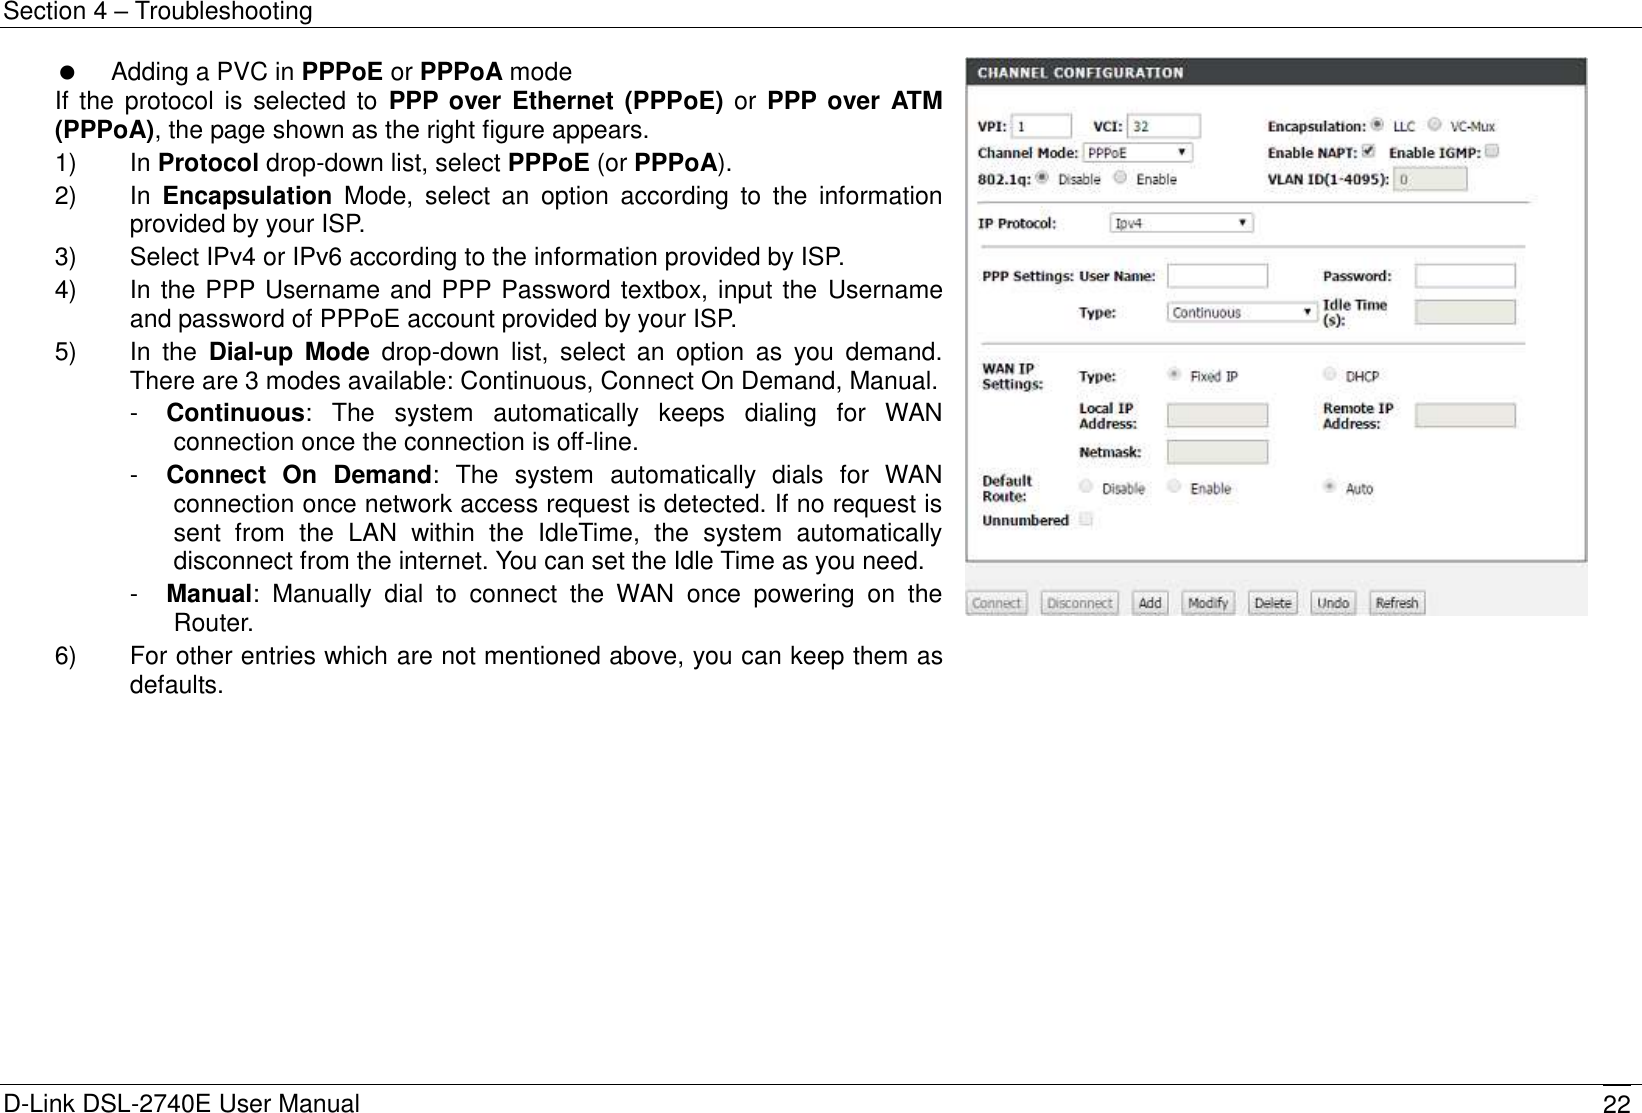 Section 4 – Troubleshooting D-Link DSL-2740E User Manual 22   Adding a PVC in PPPoE or PPPoA mode If  the protocol is selected to  PPP over Ethernet (PPPoE) or PPP over ATM (PPPoA), the page shown as the right figure appears. 1)    In Protocol drop-down list, select PPPoE (or PPPoA). 2)    In  Encapsulation  Mode,  select  an  option  according  to  the  information provided by your ISP. 3)    Select IPv4 or IPv6 according to the information provided by ISP. 4)    In the PPP Username and PPP Password textbox, input the Username and password of PPPoE account provided by your ISP. 5)    In  the  Dial-up  Mode  drop-down  list,  select  an  option  as  you  demand. There are 3 modes available: Continuous, Connect On Demand, Manual. -  Continuous:  The  system  automatically  keeps  dialing  for  WAN connection once the connection is off-line. -  Connect  On  Demand:  The  system  automatically  dials  for  WAN connection once network access request is detected. If no request is sent  from  the  LAN  within  the  IdleTime,  the  system  automatically disconnect from the internet. You can set the Idle Time as you need. -  Manual:  Manually  dial  to  connect  the  WAN  once  powering  on  the Router.   6)    For other entries which are not mentioned above, you can keep them as defaults.   